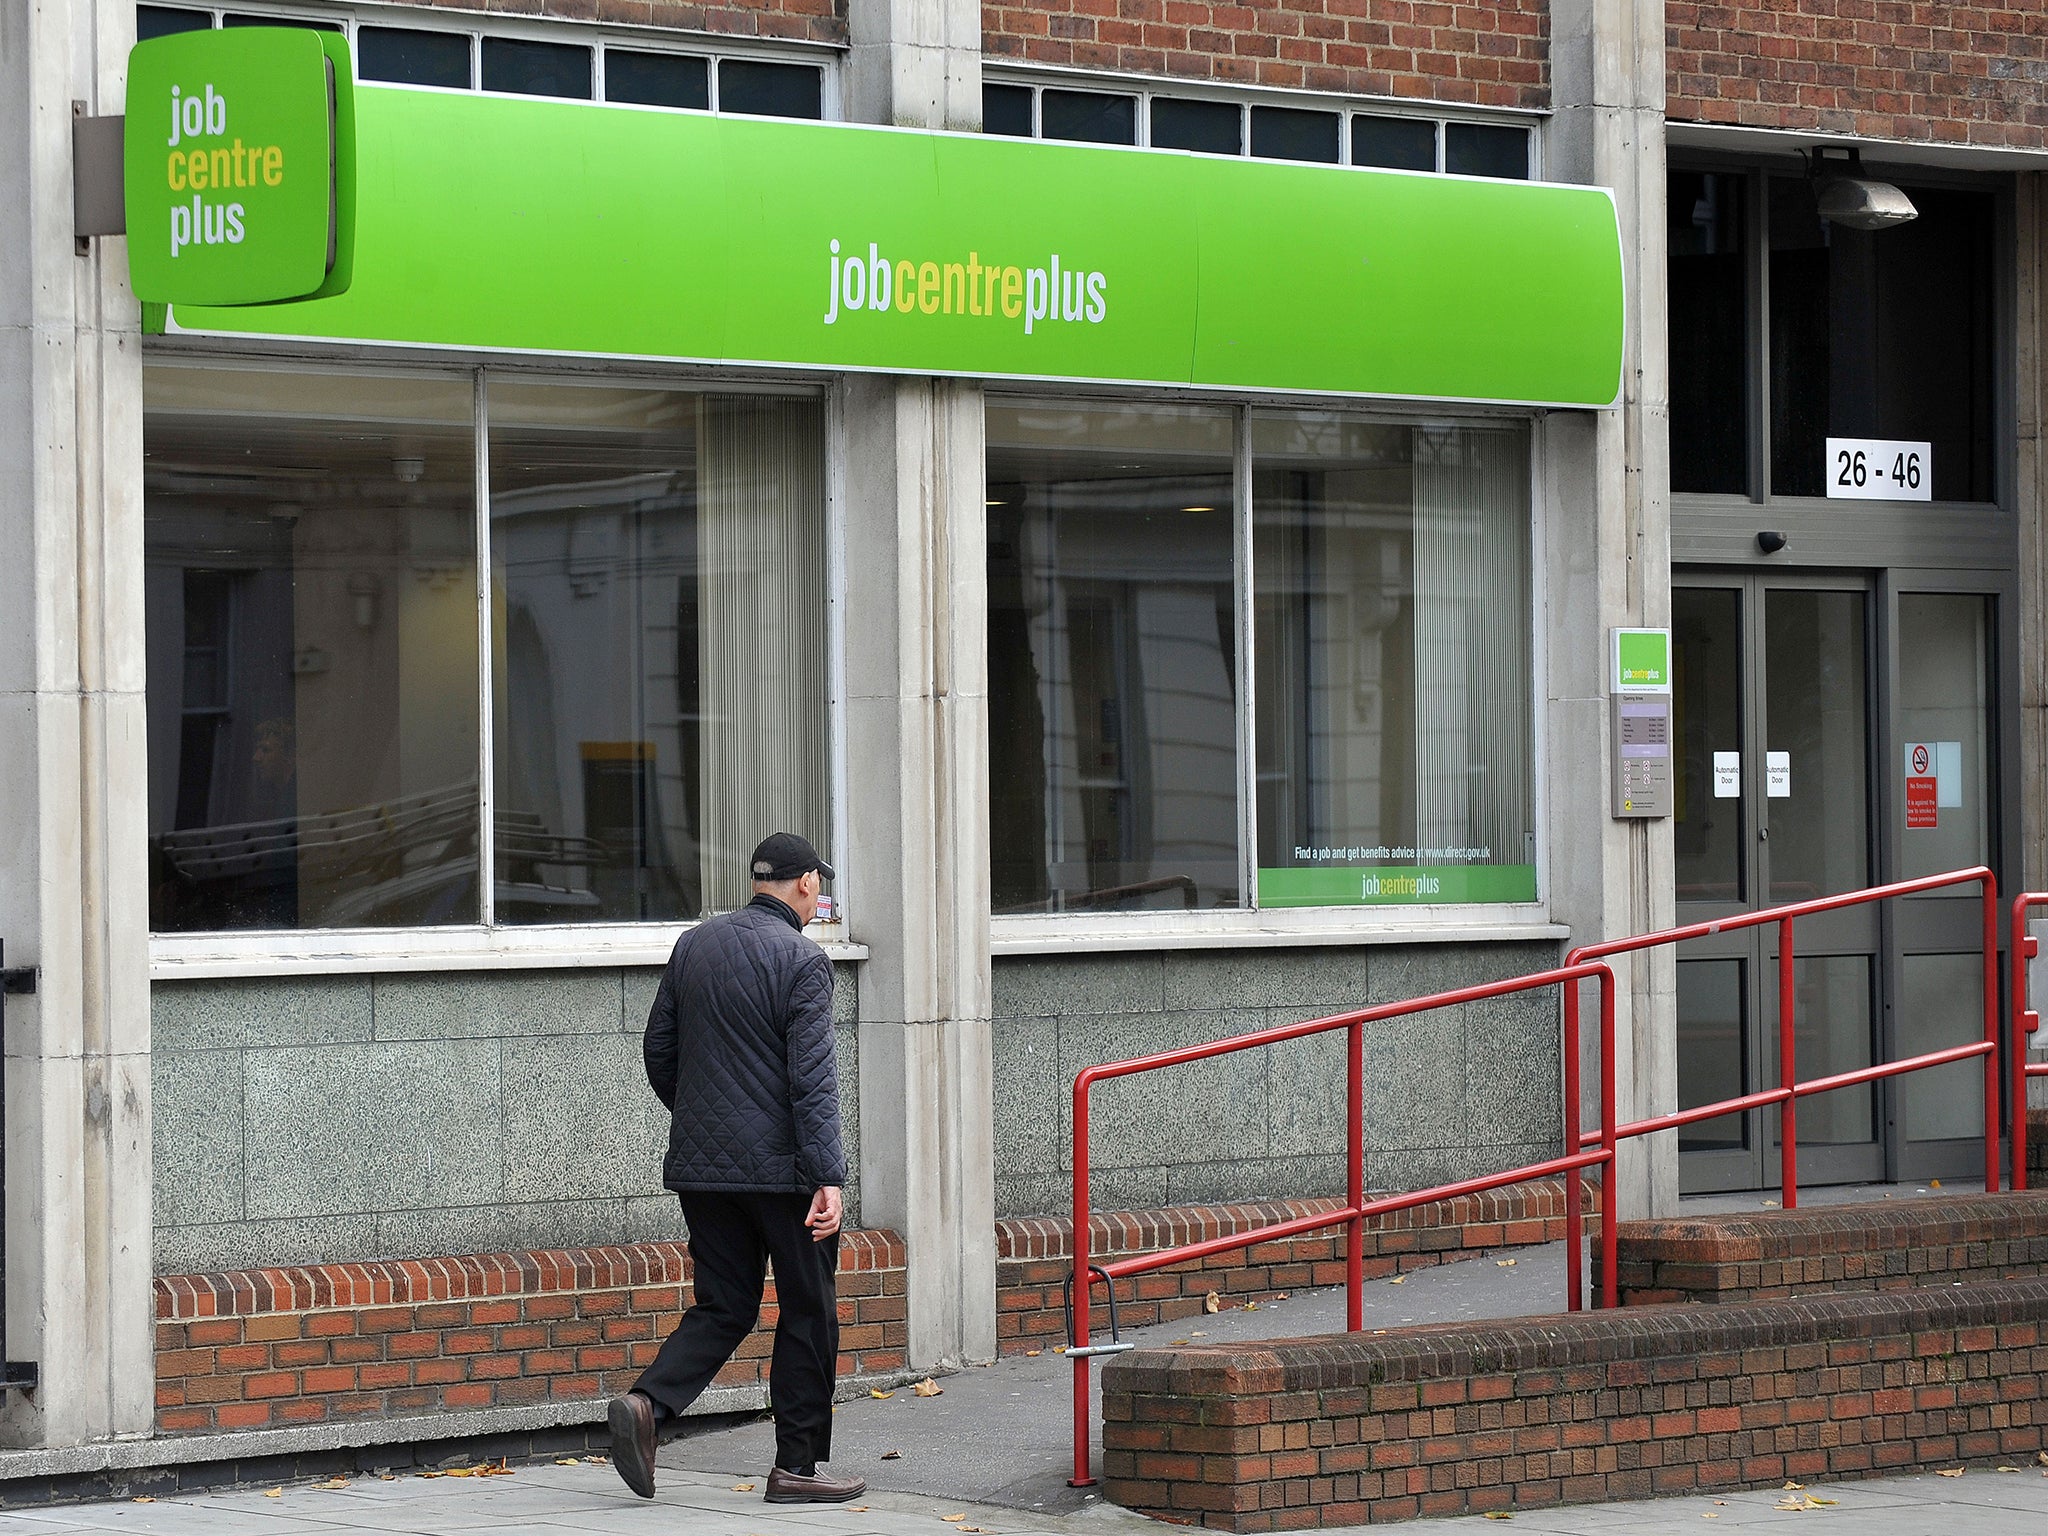 Young people shun job centres because of ‘stigma’ – while others lack the necessary documents